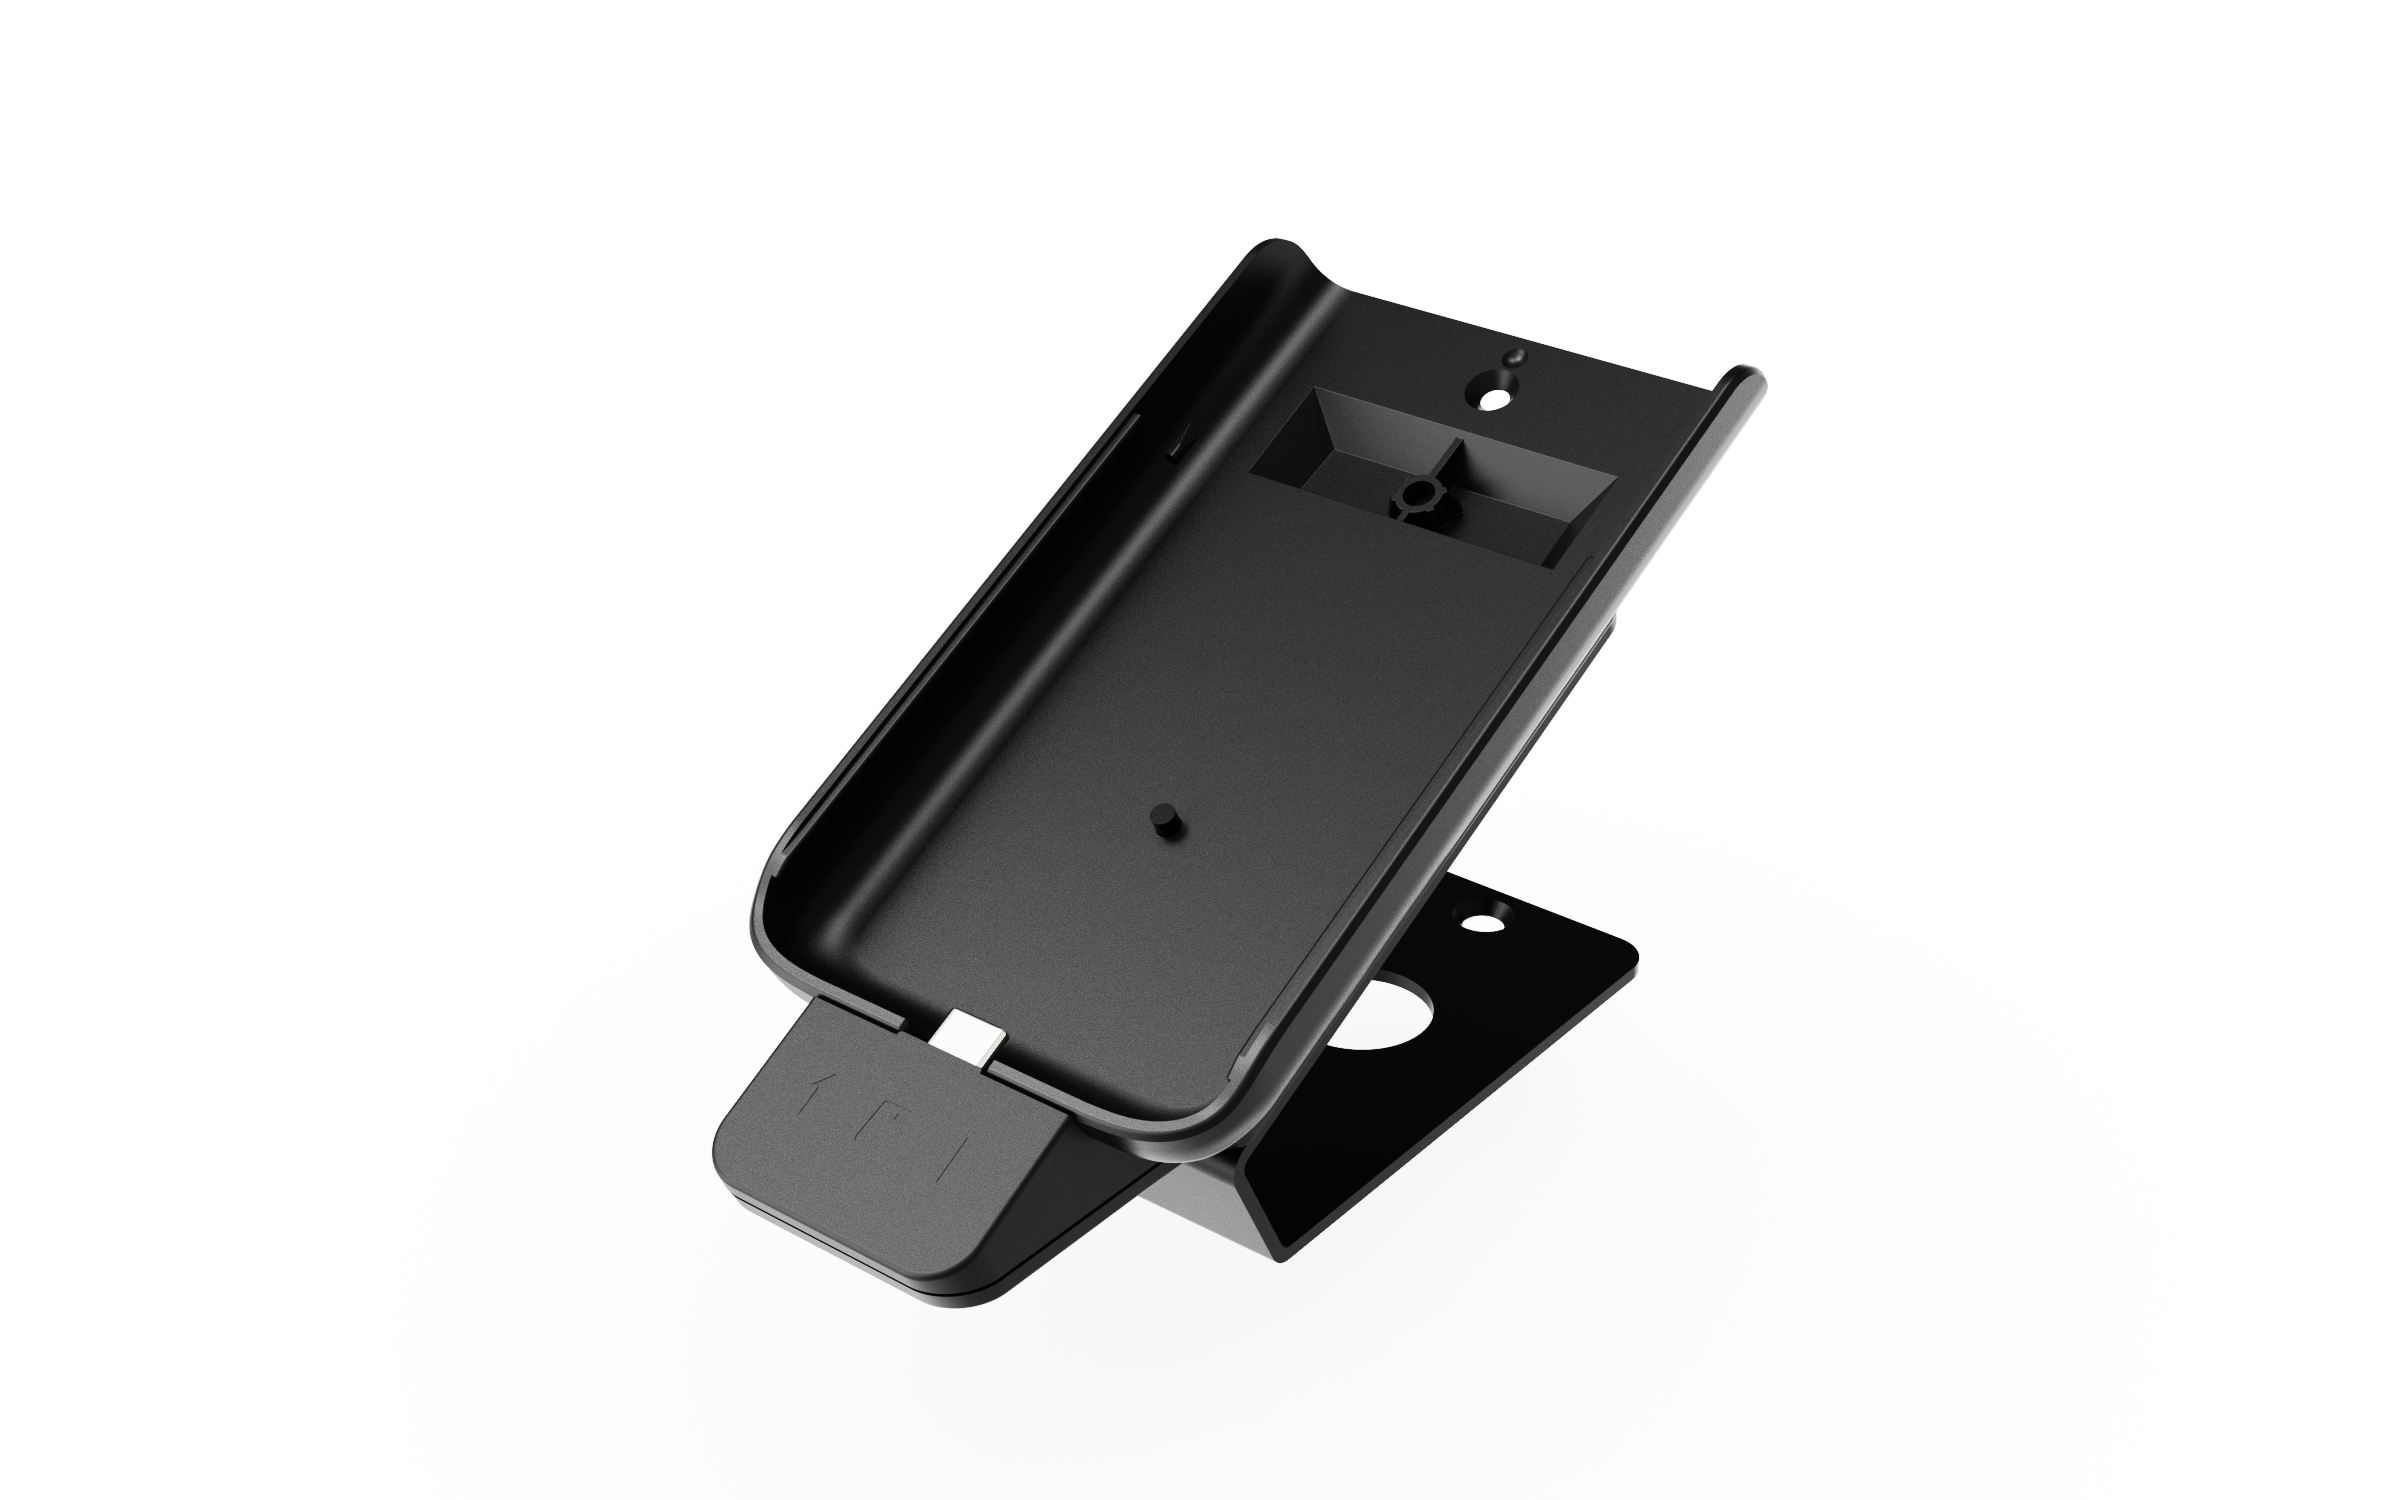 Single Wedge Base Stand for Verifone e285 Mobile Payment Devices